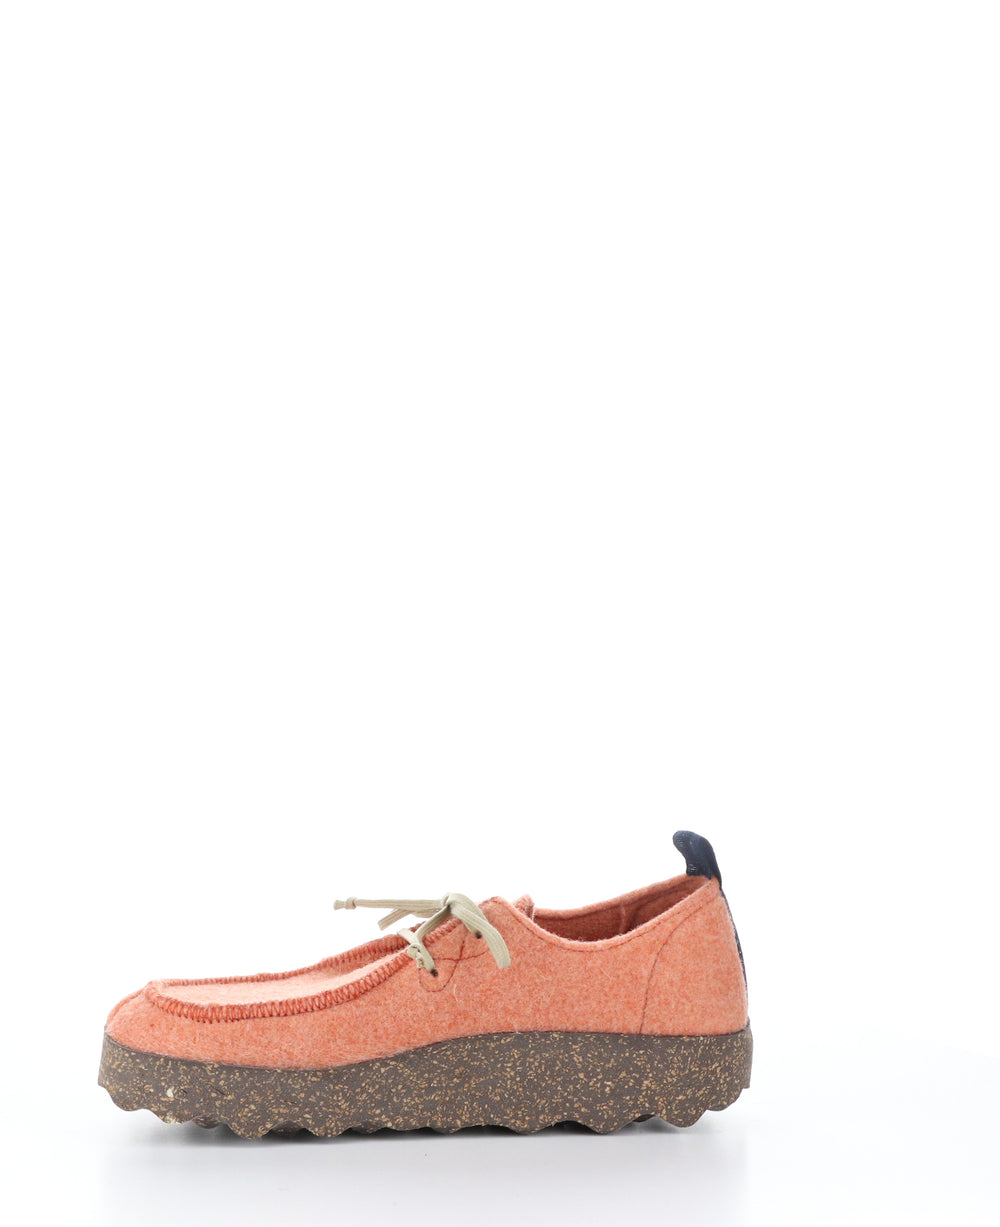 CHAT063ASP Tangerine Round Toe Shoes|CHAT063ASP Chaussures à Bout Rond in Orange